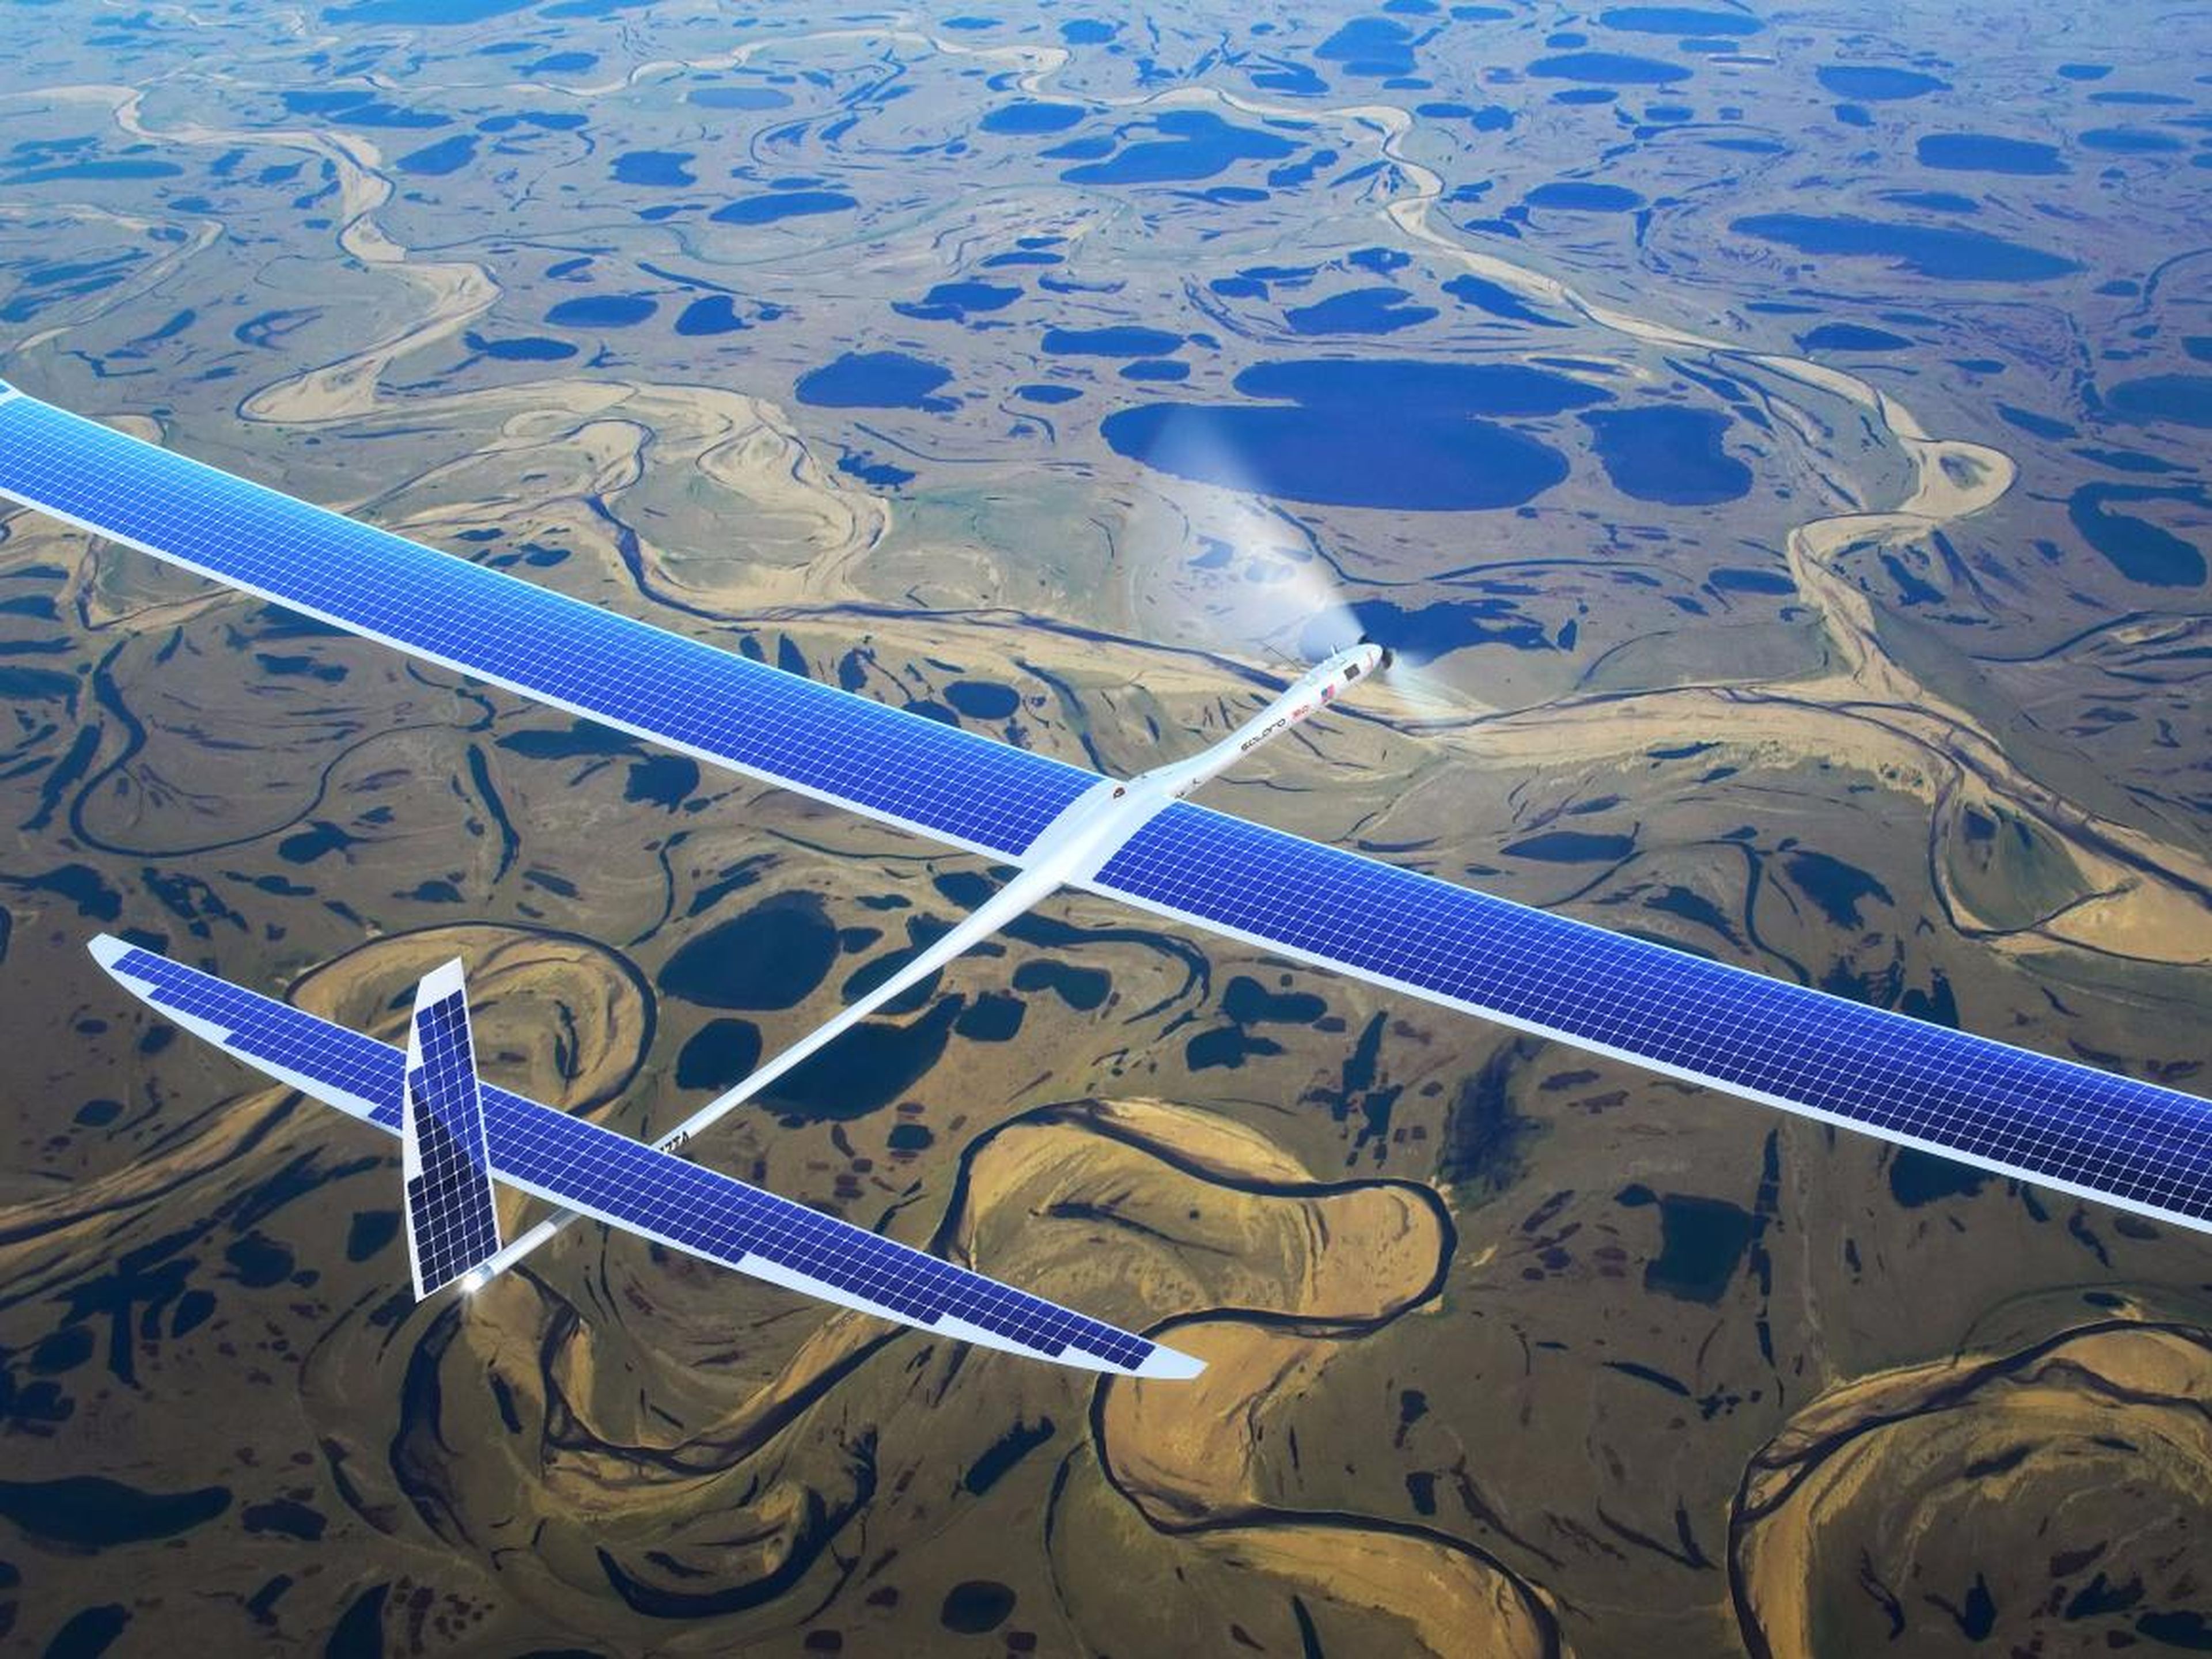 Titan Aerospace was acquired by Google in 2014 and renamed Project Titan as part of X. Project Titan was charged with building solar-powered drones built to fly nonstop for years and beam internet around the world. But the project